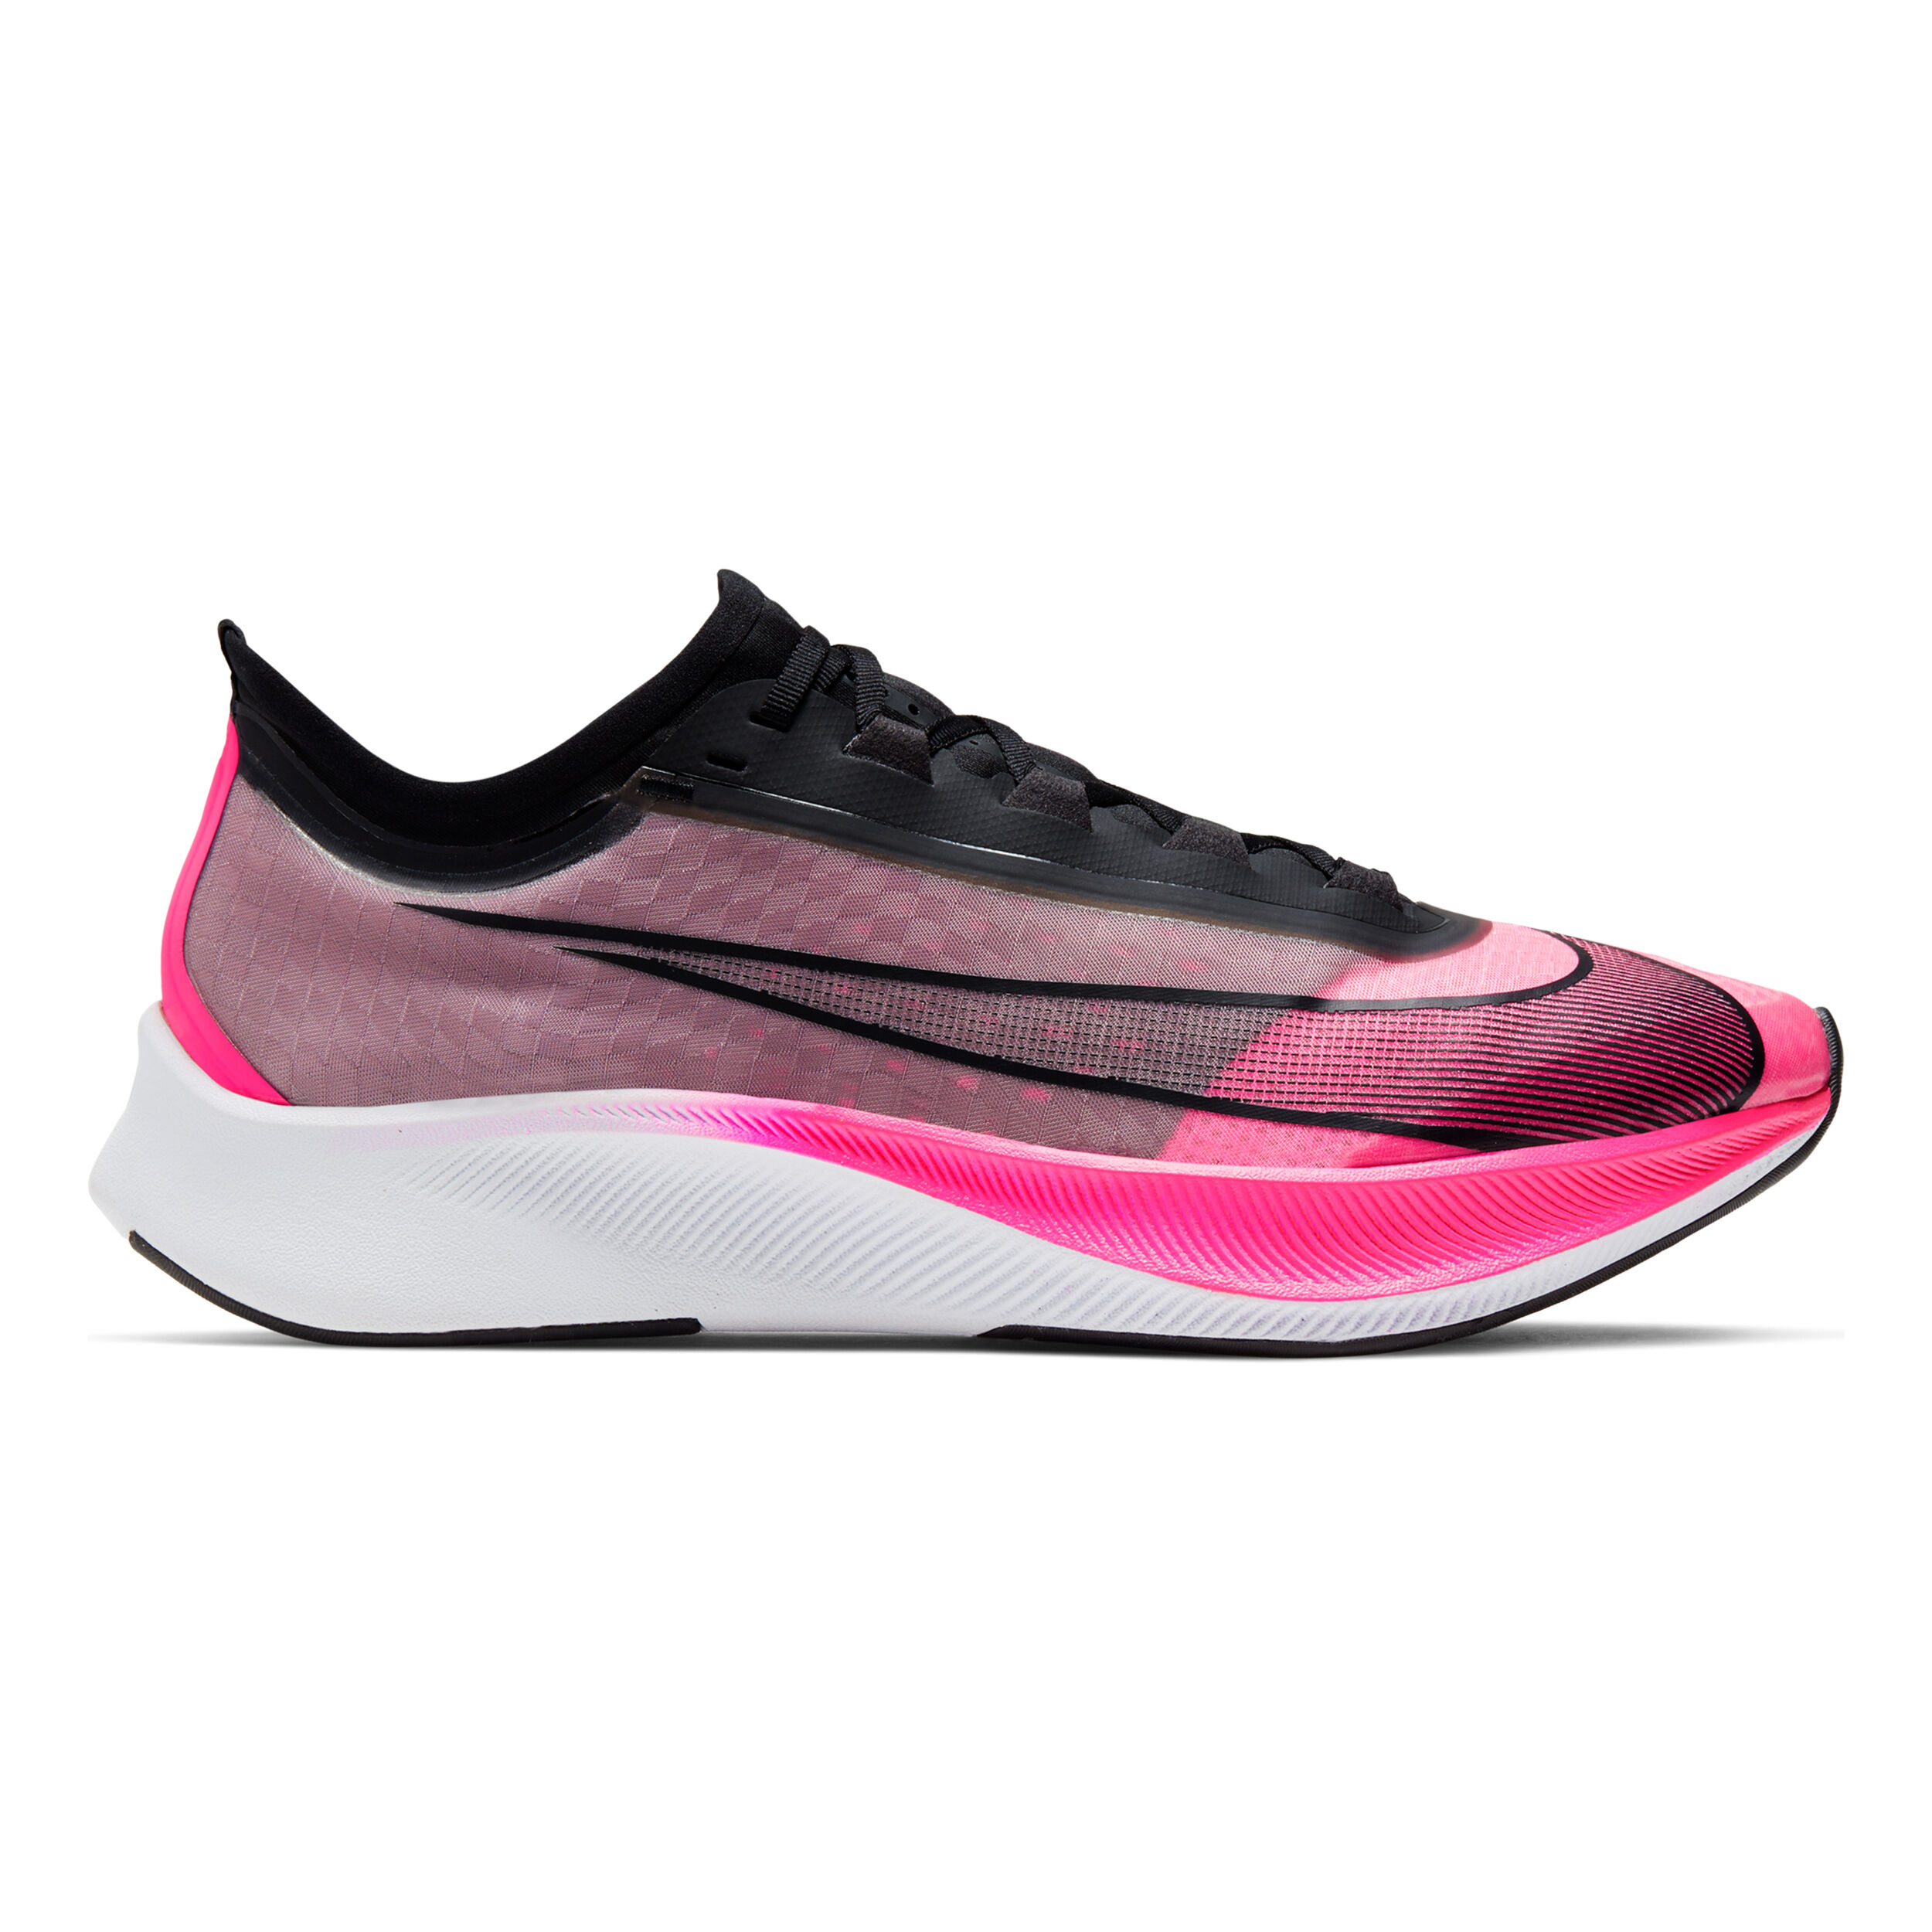 pink zoom fly 3